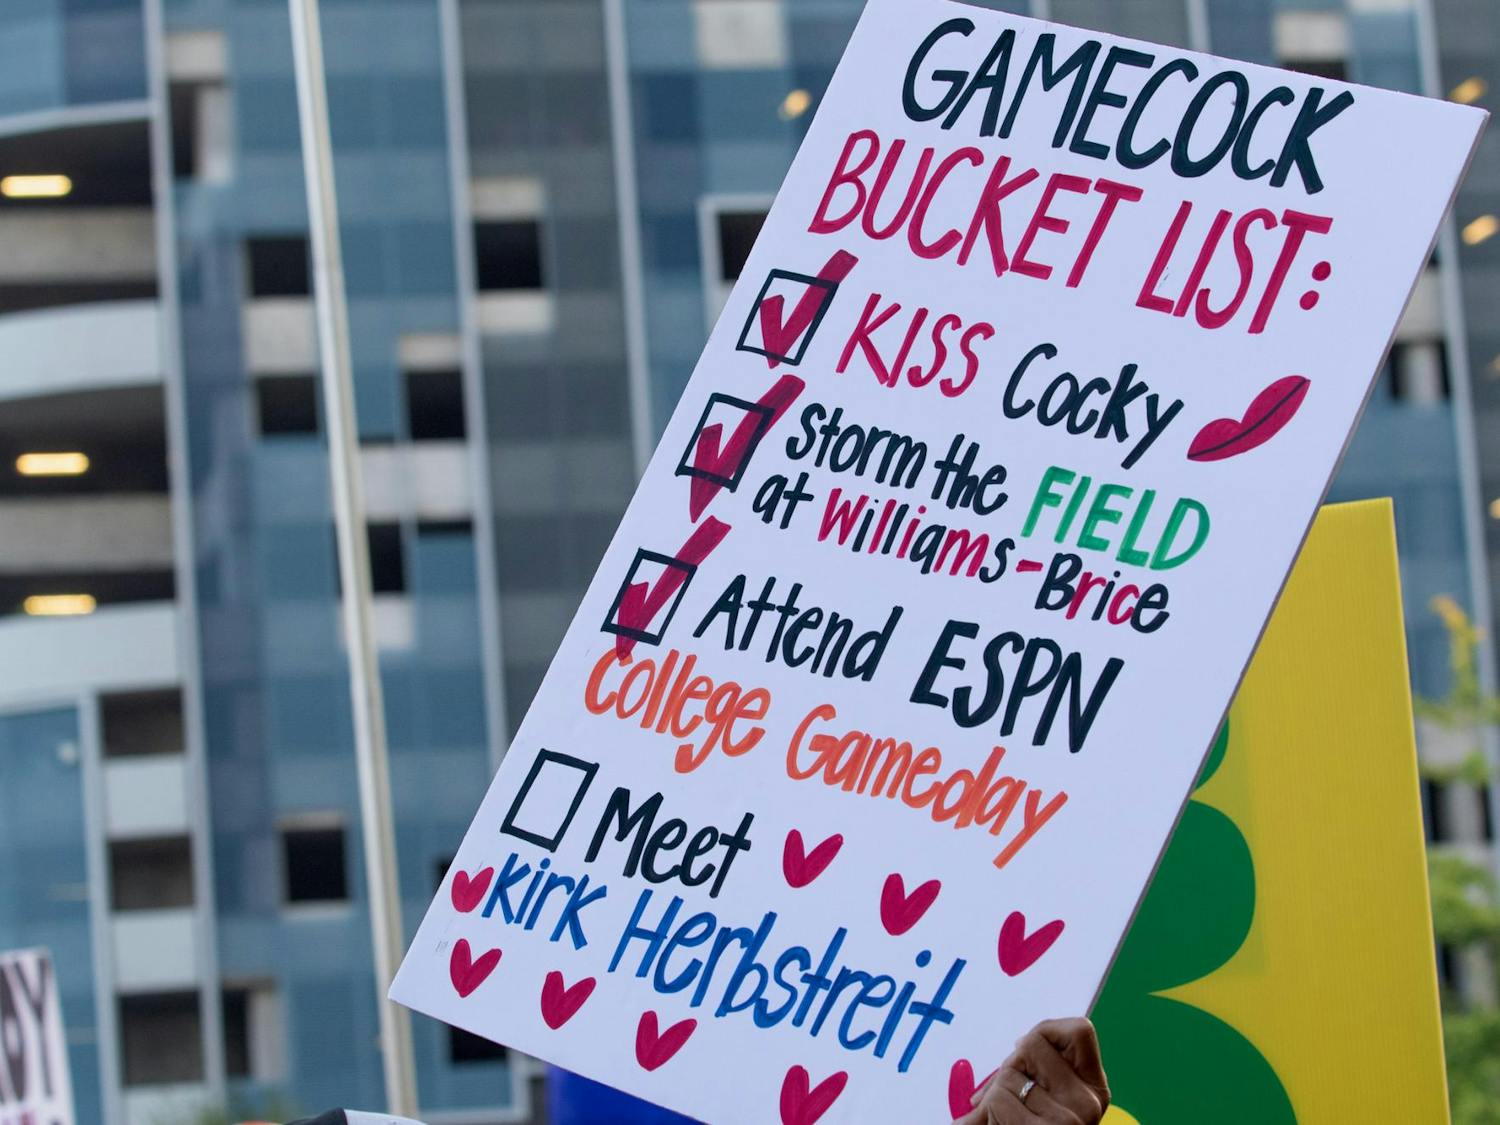 A fan holds up a sign of her “Gamecock Bucket List”. Thousands of South Carolina and North Carolina fans gathered to cheer for their teams during ESPN’s College GameDay broadcast ahead of the neutral site game.